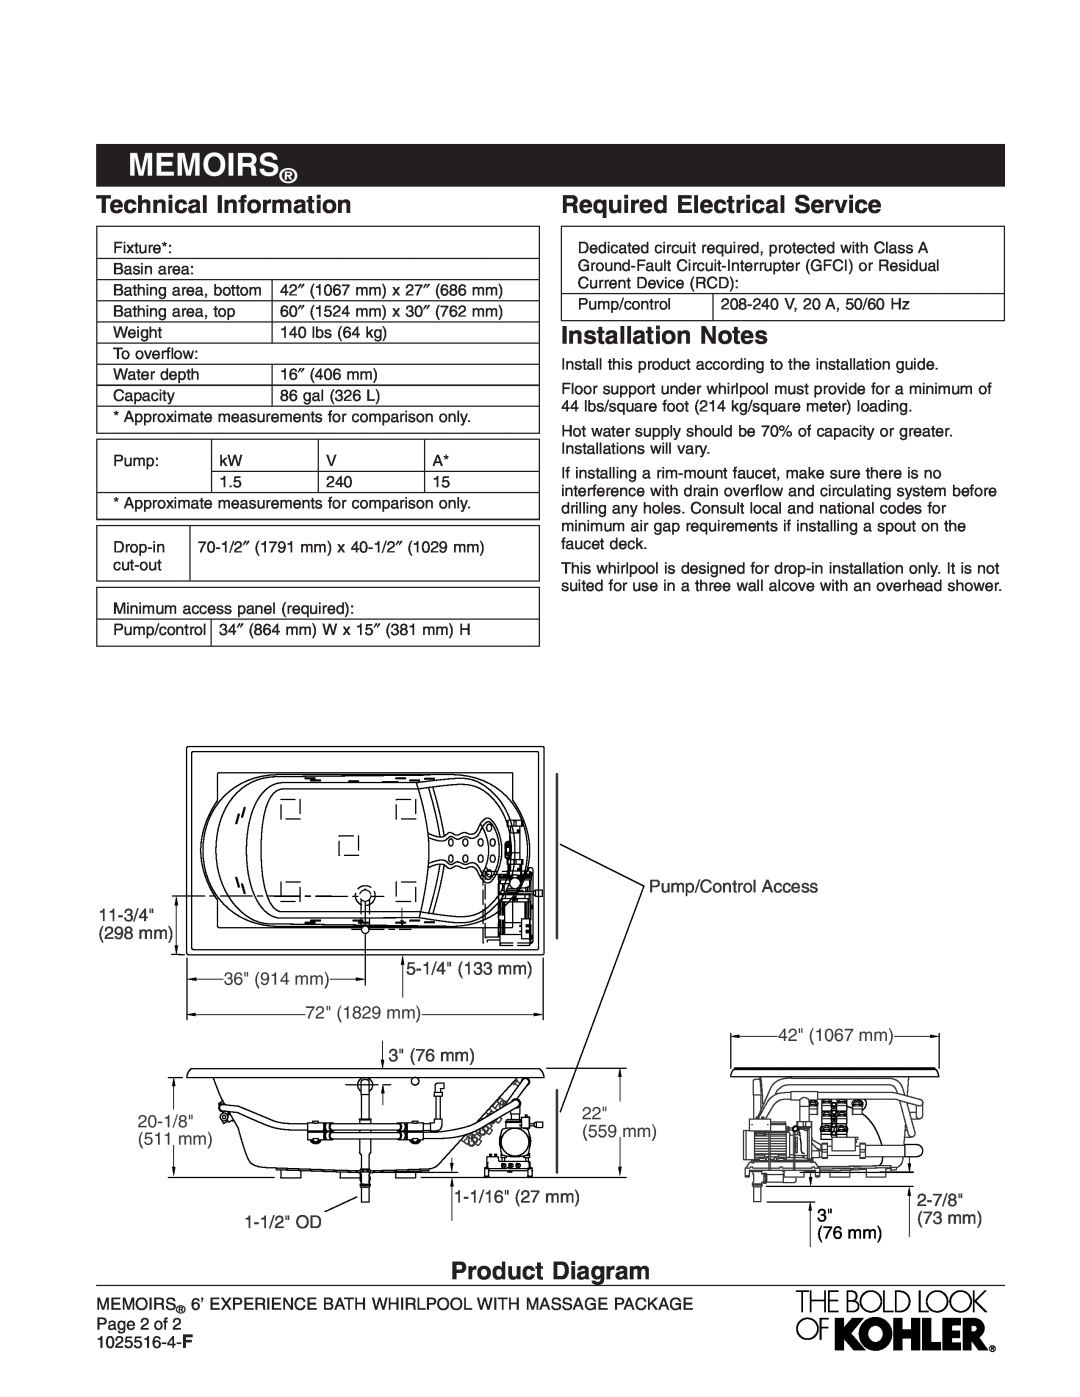 Kohler K-1418-M manual Technical Information, Required Electrical Service, Installation Notes, Product Diagram, Memoirs 